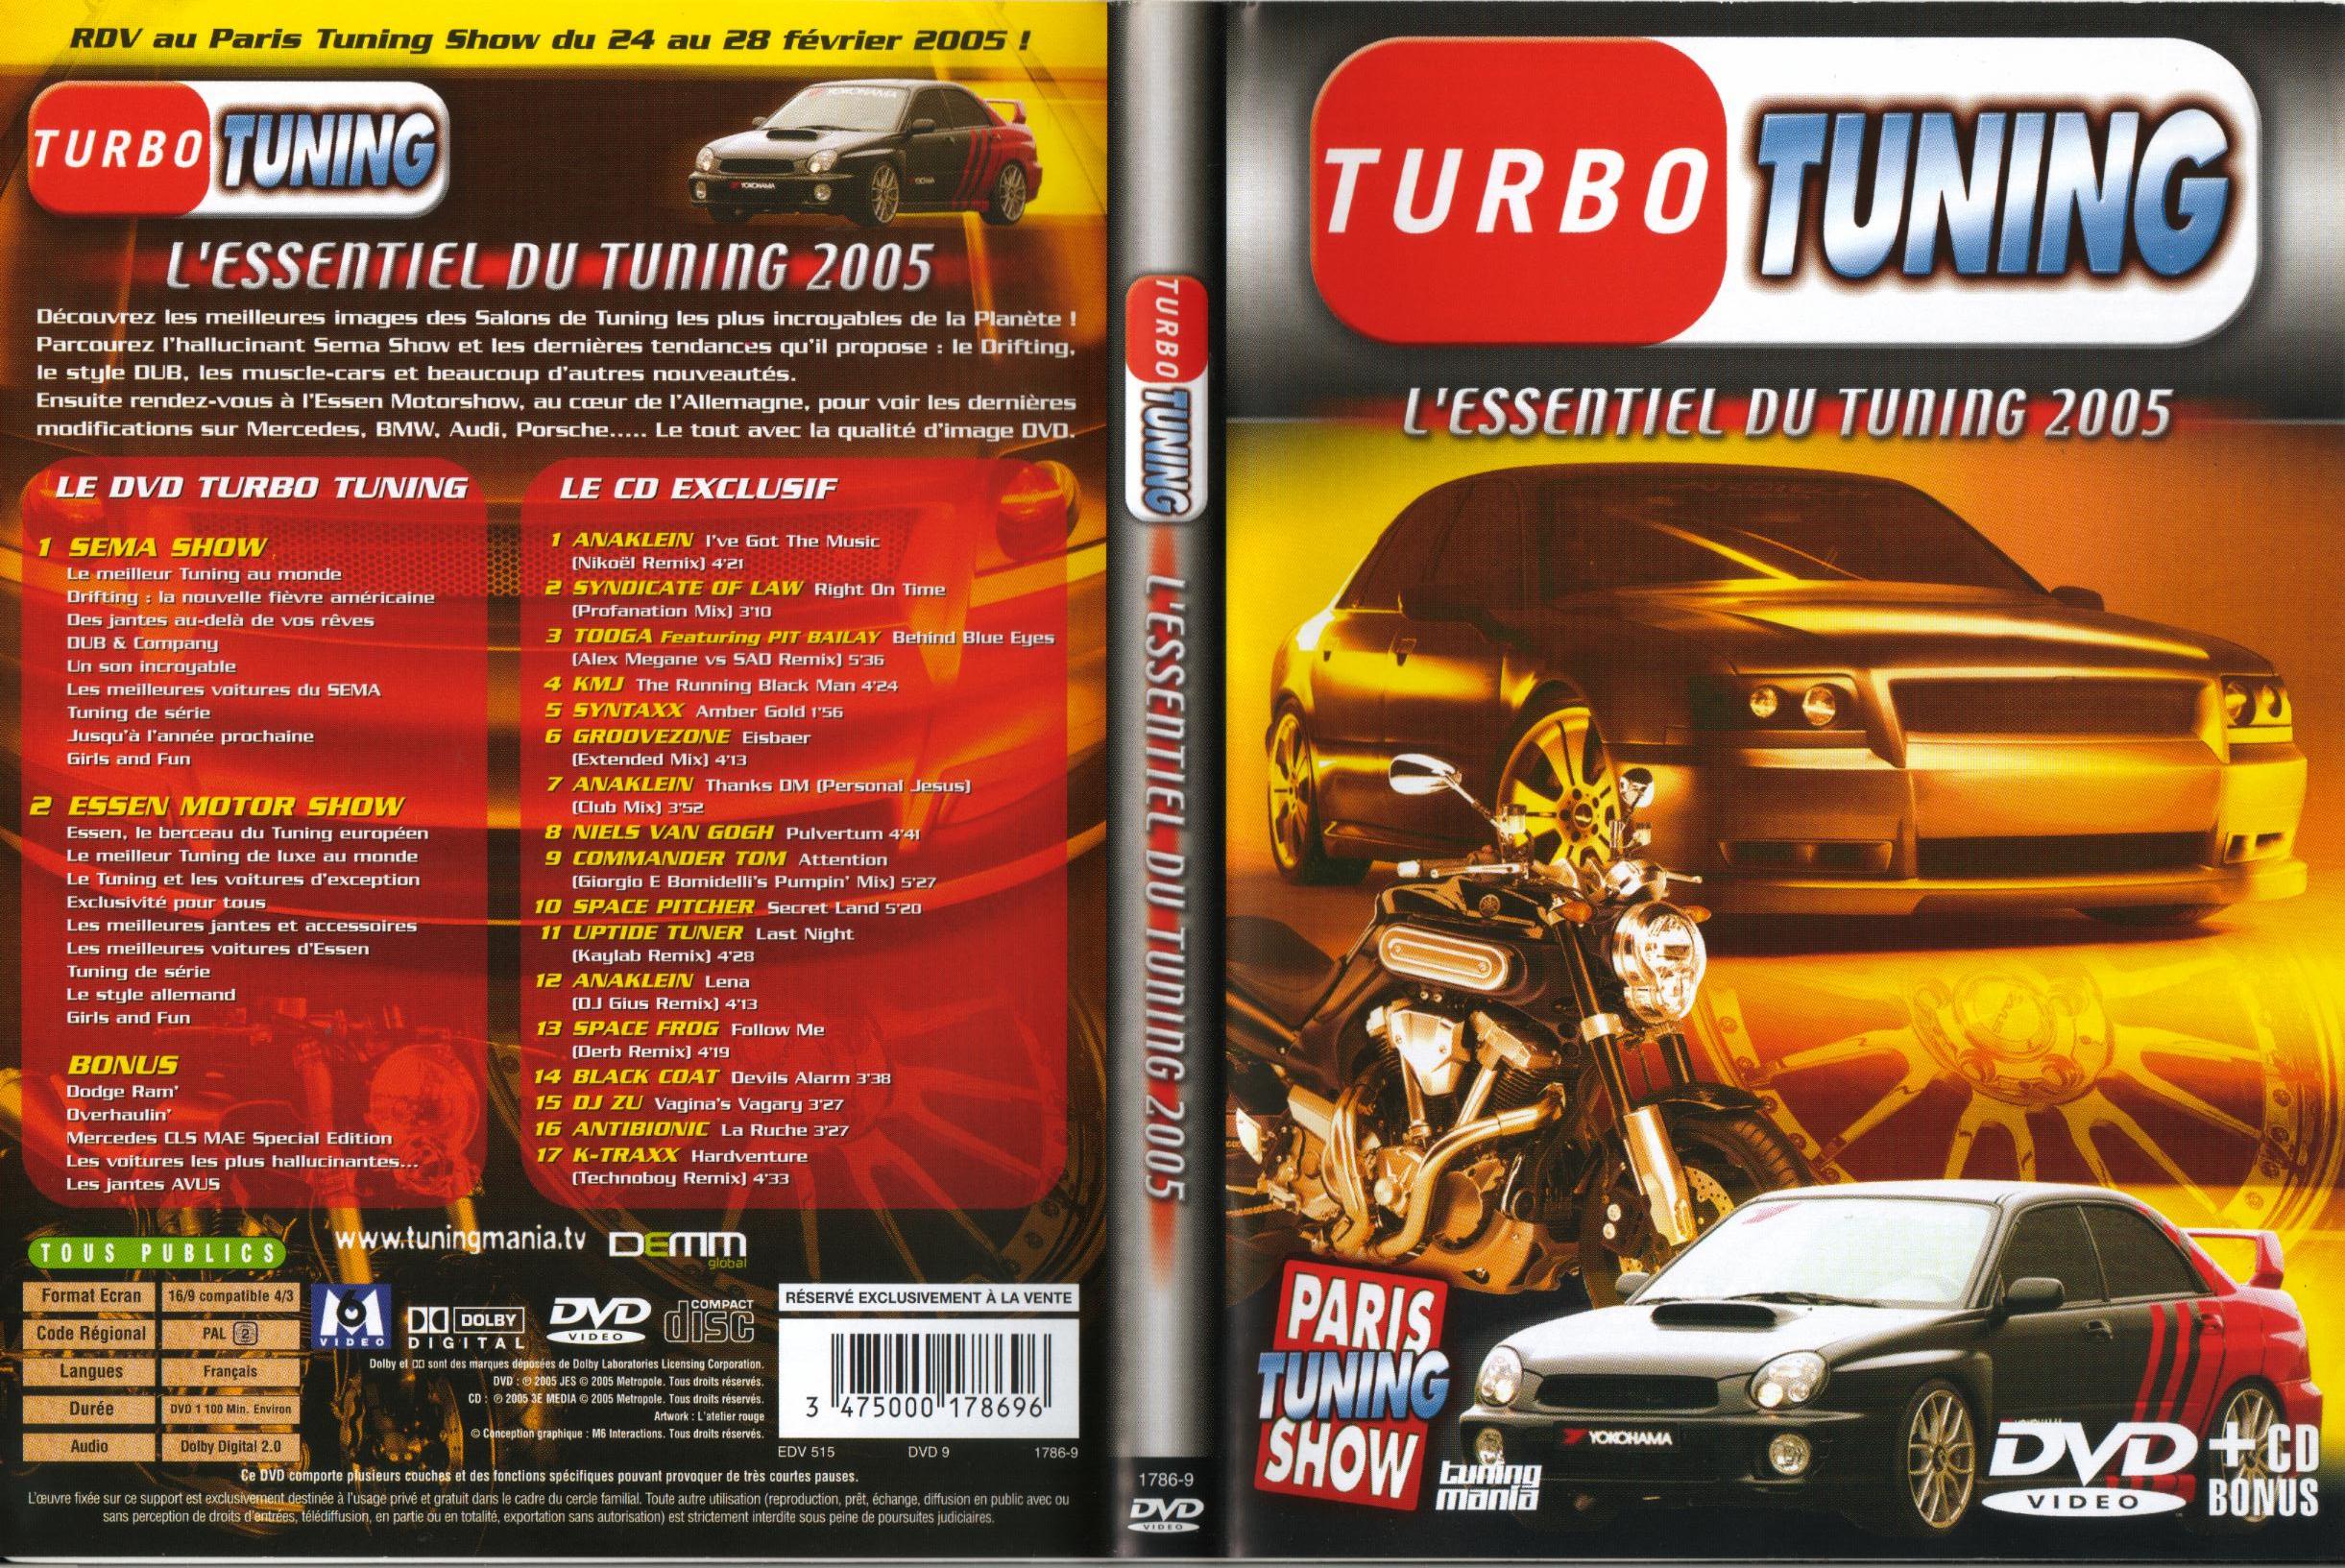 Jaquette DVD Turbo tuning 2005